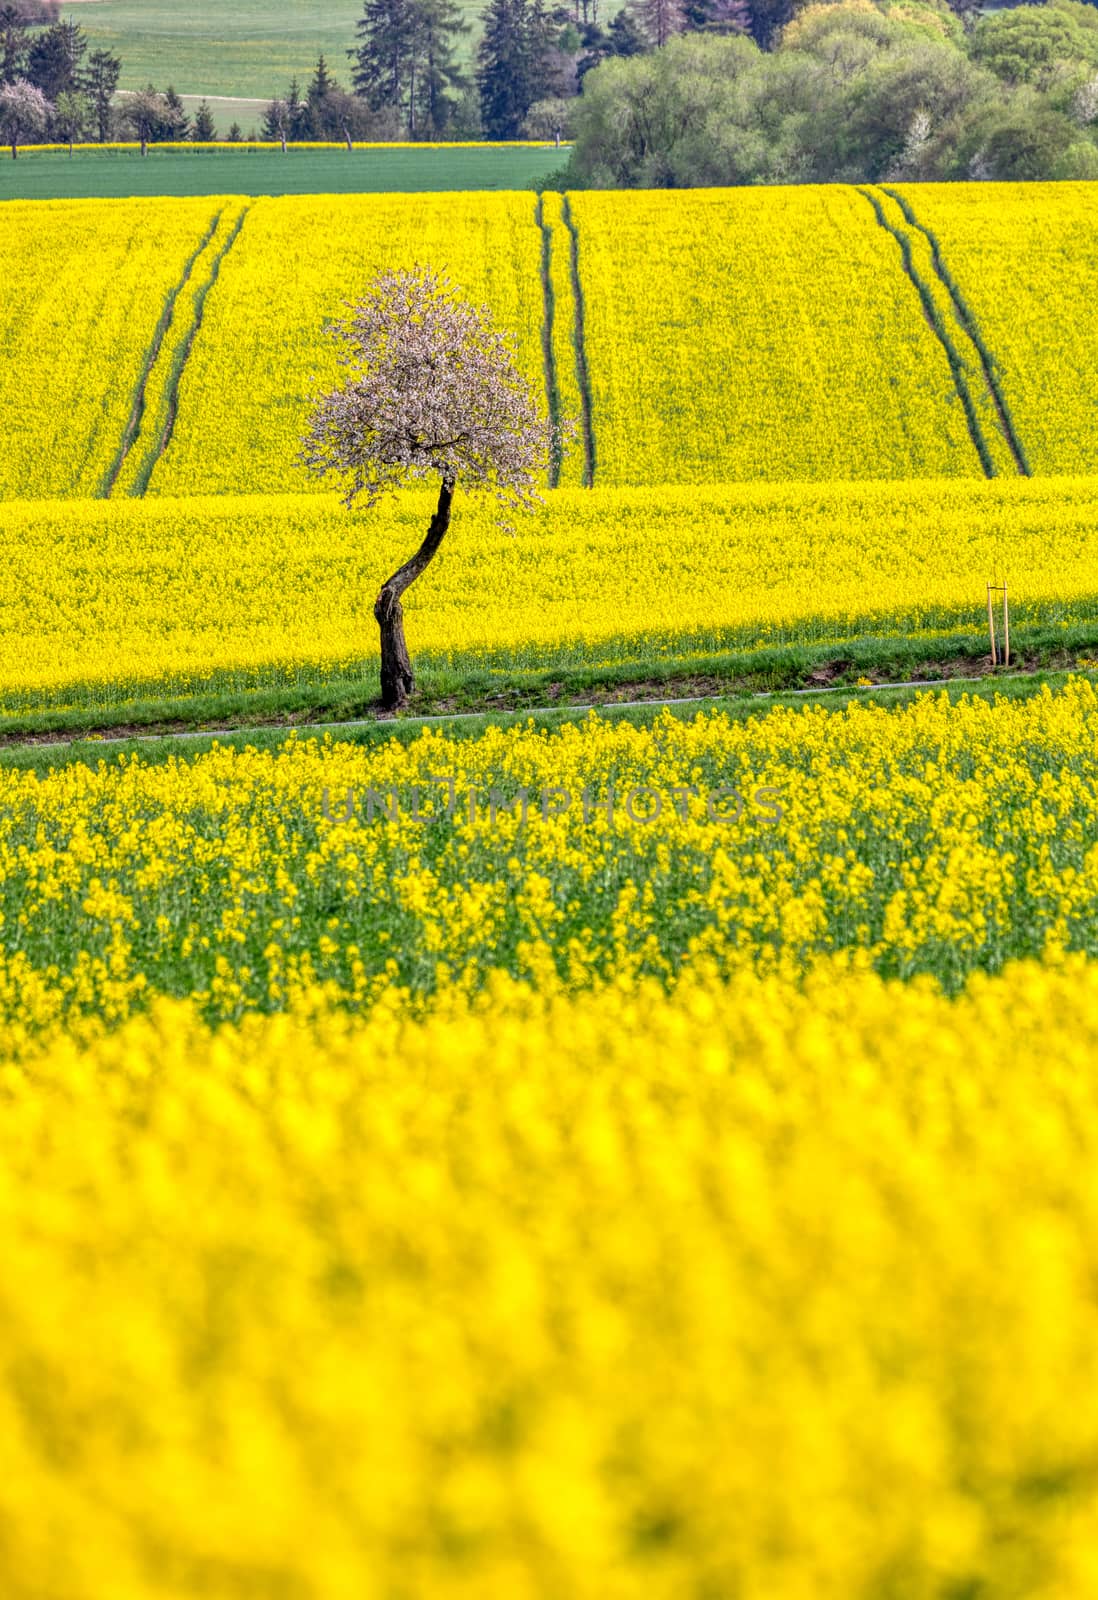 spring scenery, summer rural landscape with rape field and white flowering cherry tree. Rural landscape. Spring landscape. Yellow rape field in countryside. Beautiful Czech highland countryside